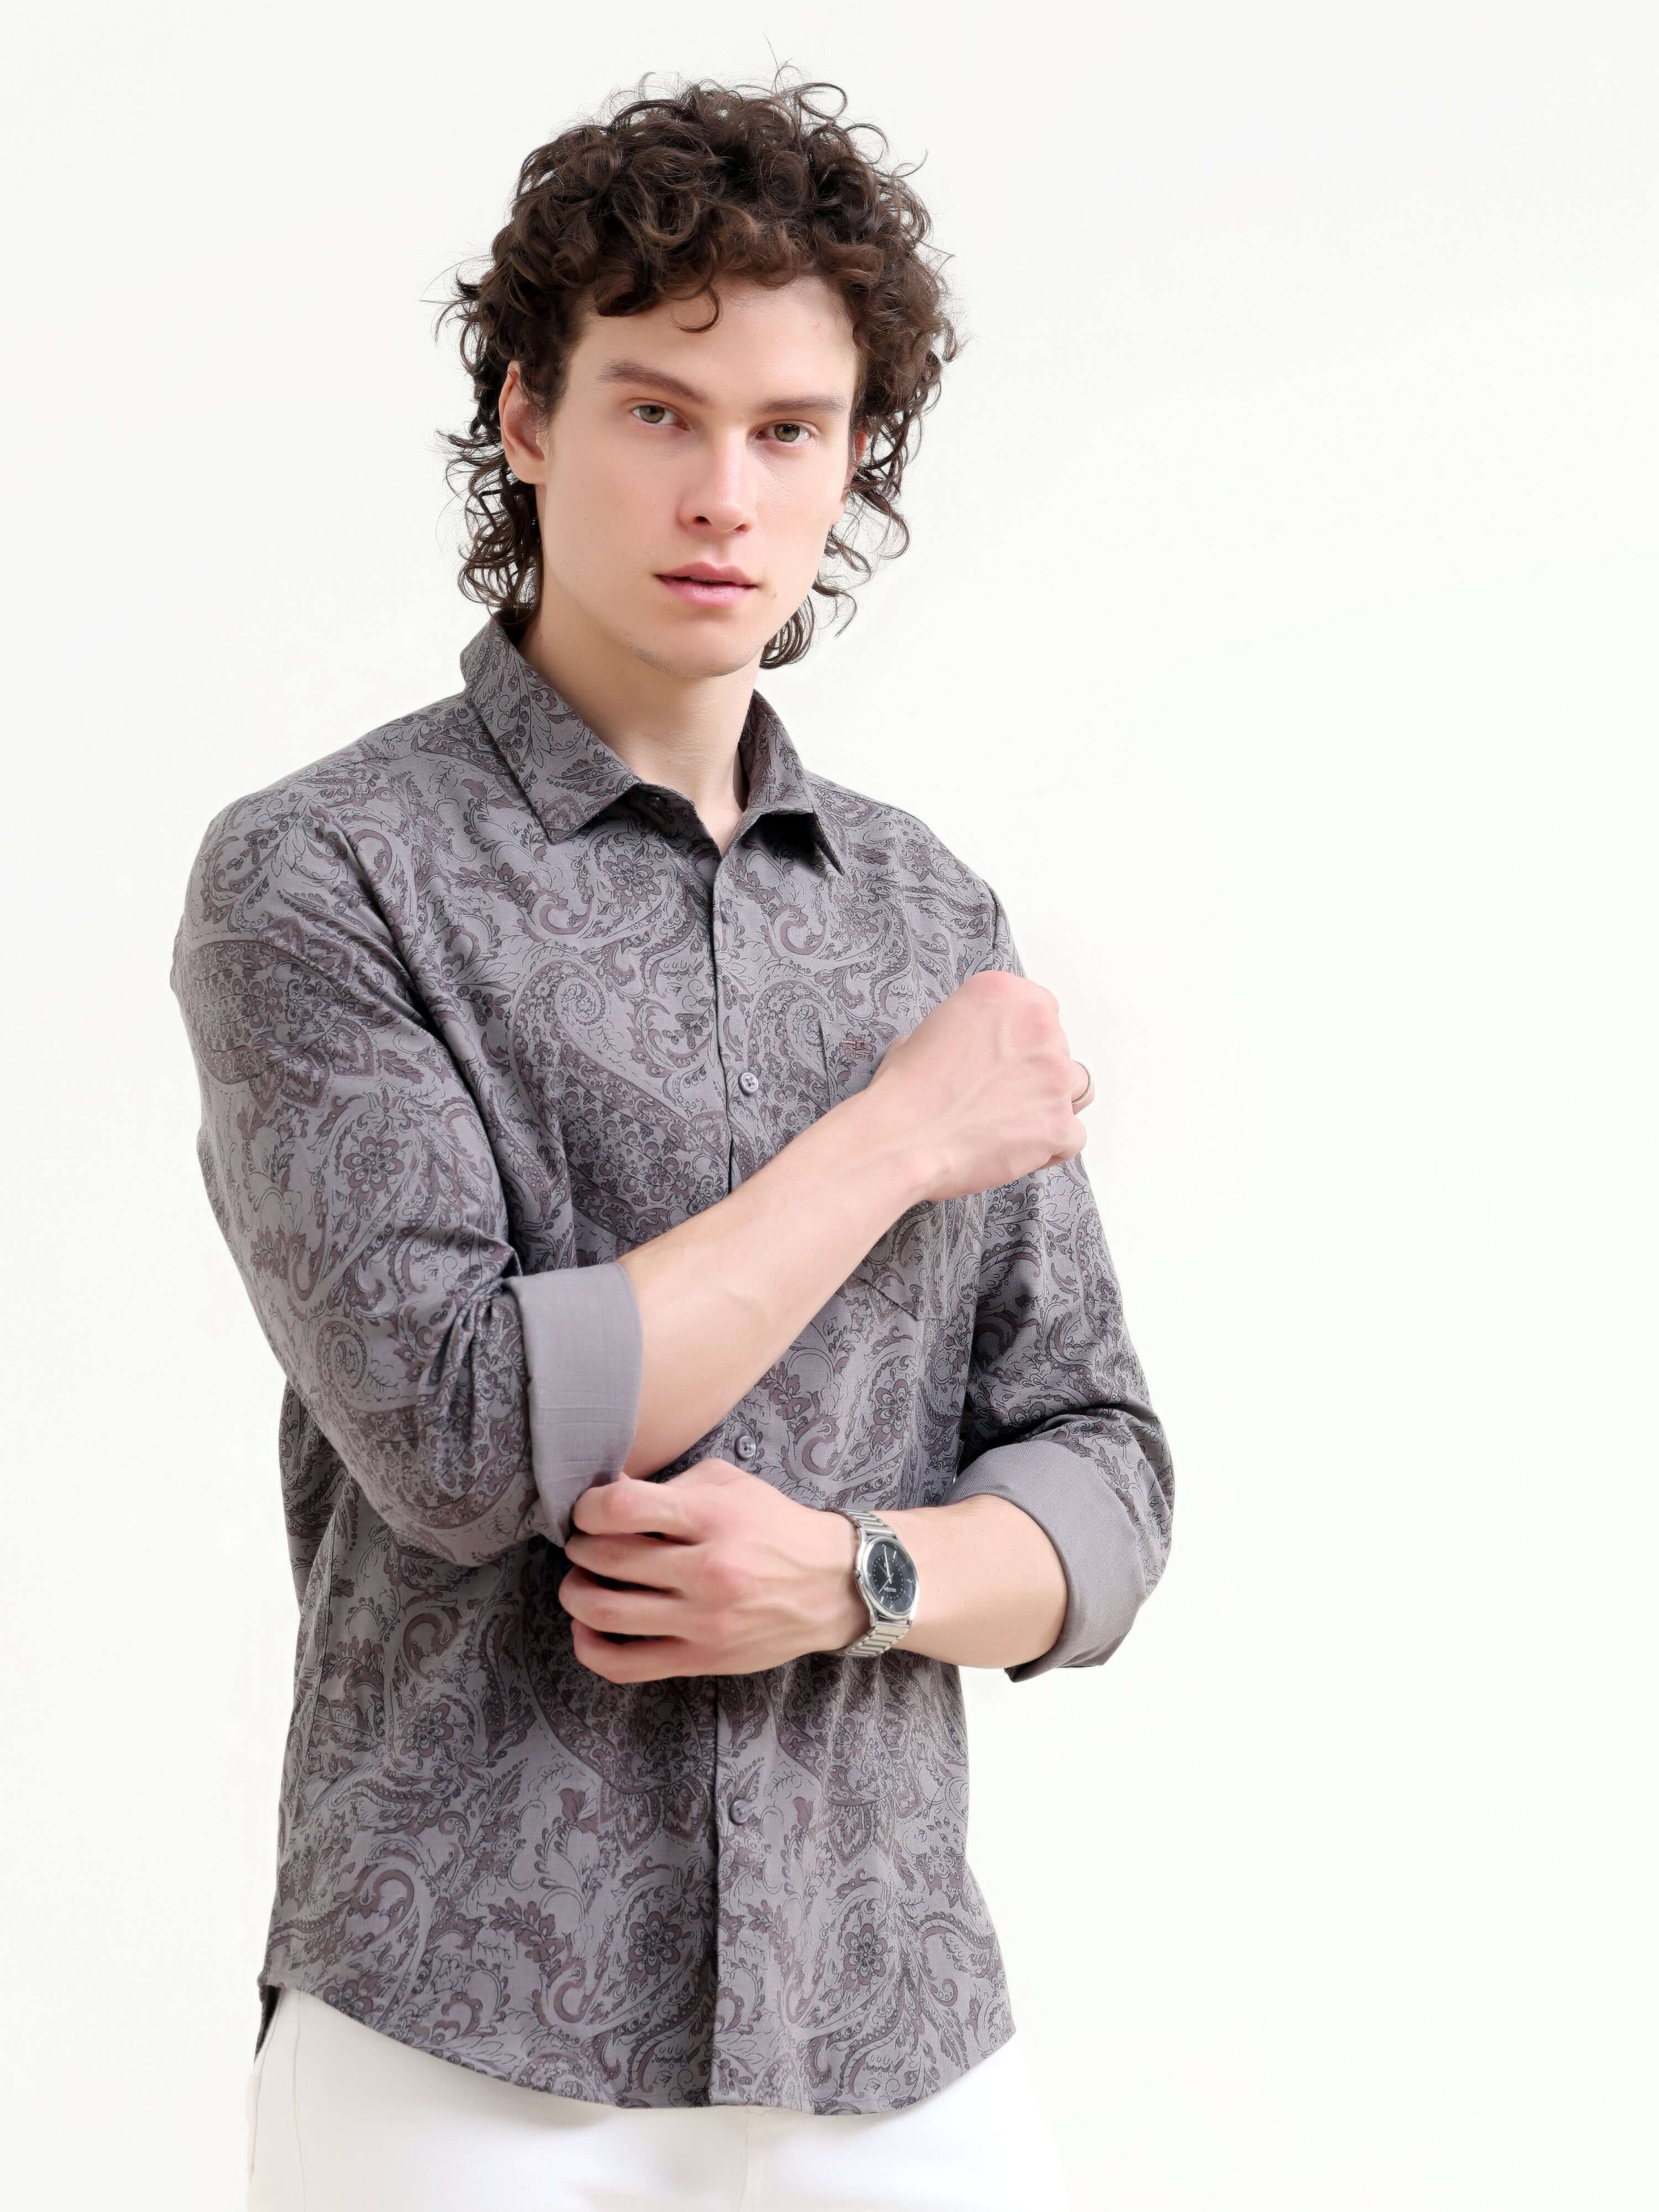 Men's Paisley Gray Floral Shirt - New Summer Arrival shop online at Estilocus. Elevate your style with our dusky gray paisley floral printed shirt. Perfect for summer, this new arrival combines comfort with a casual, artistic touch.